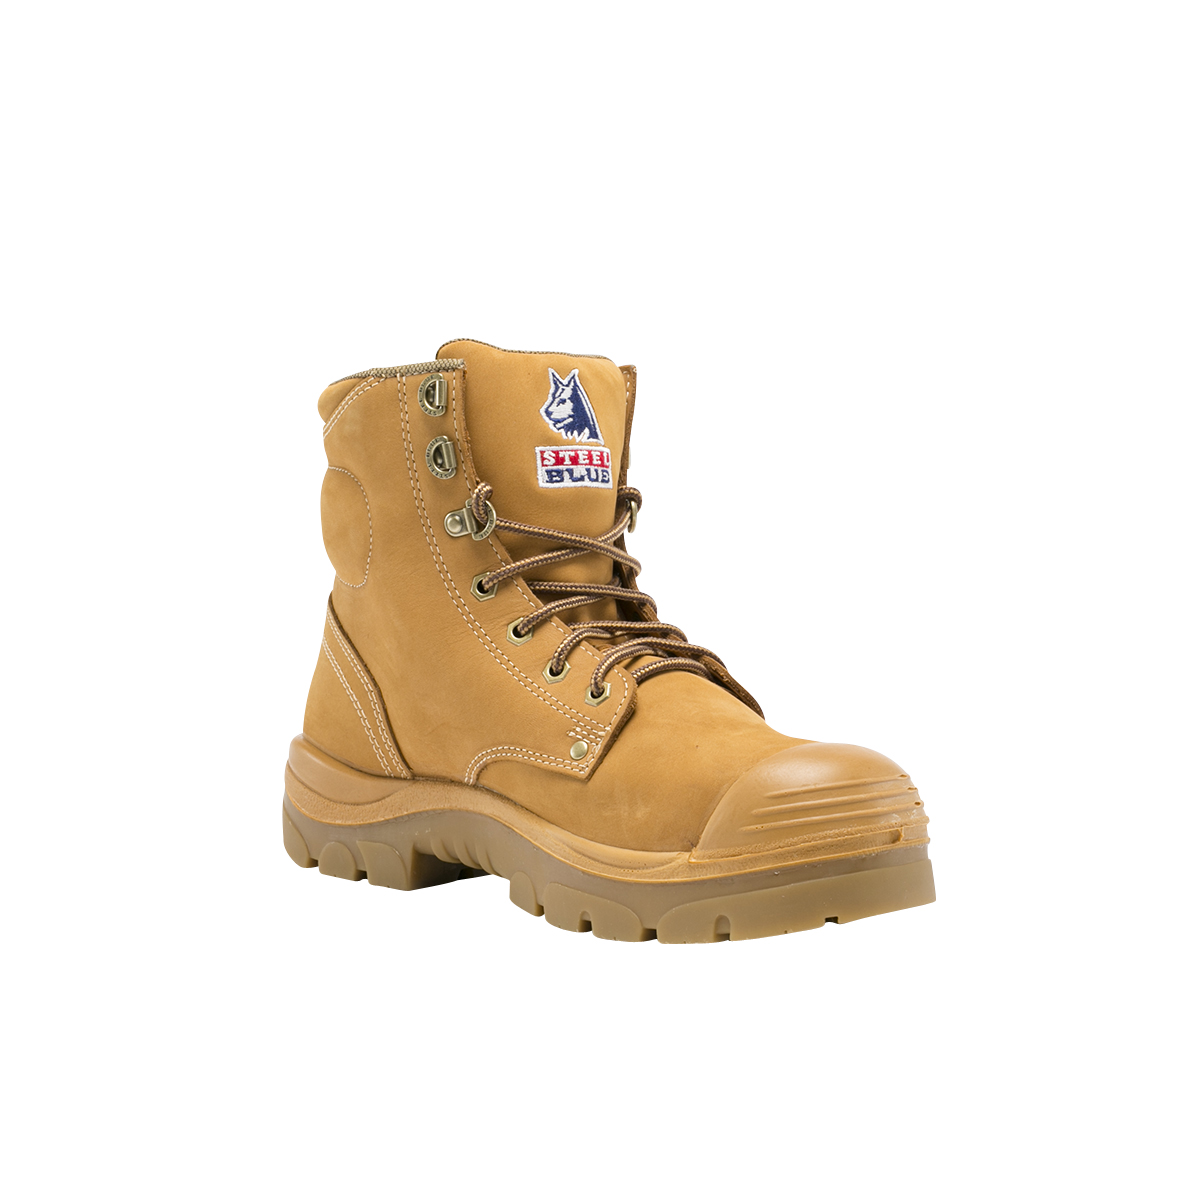 SAFETY BOOT ARGYLE BUMPCAP S10 -ANKLE LACE UP WHEAT